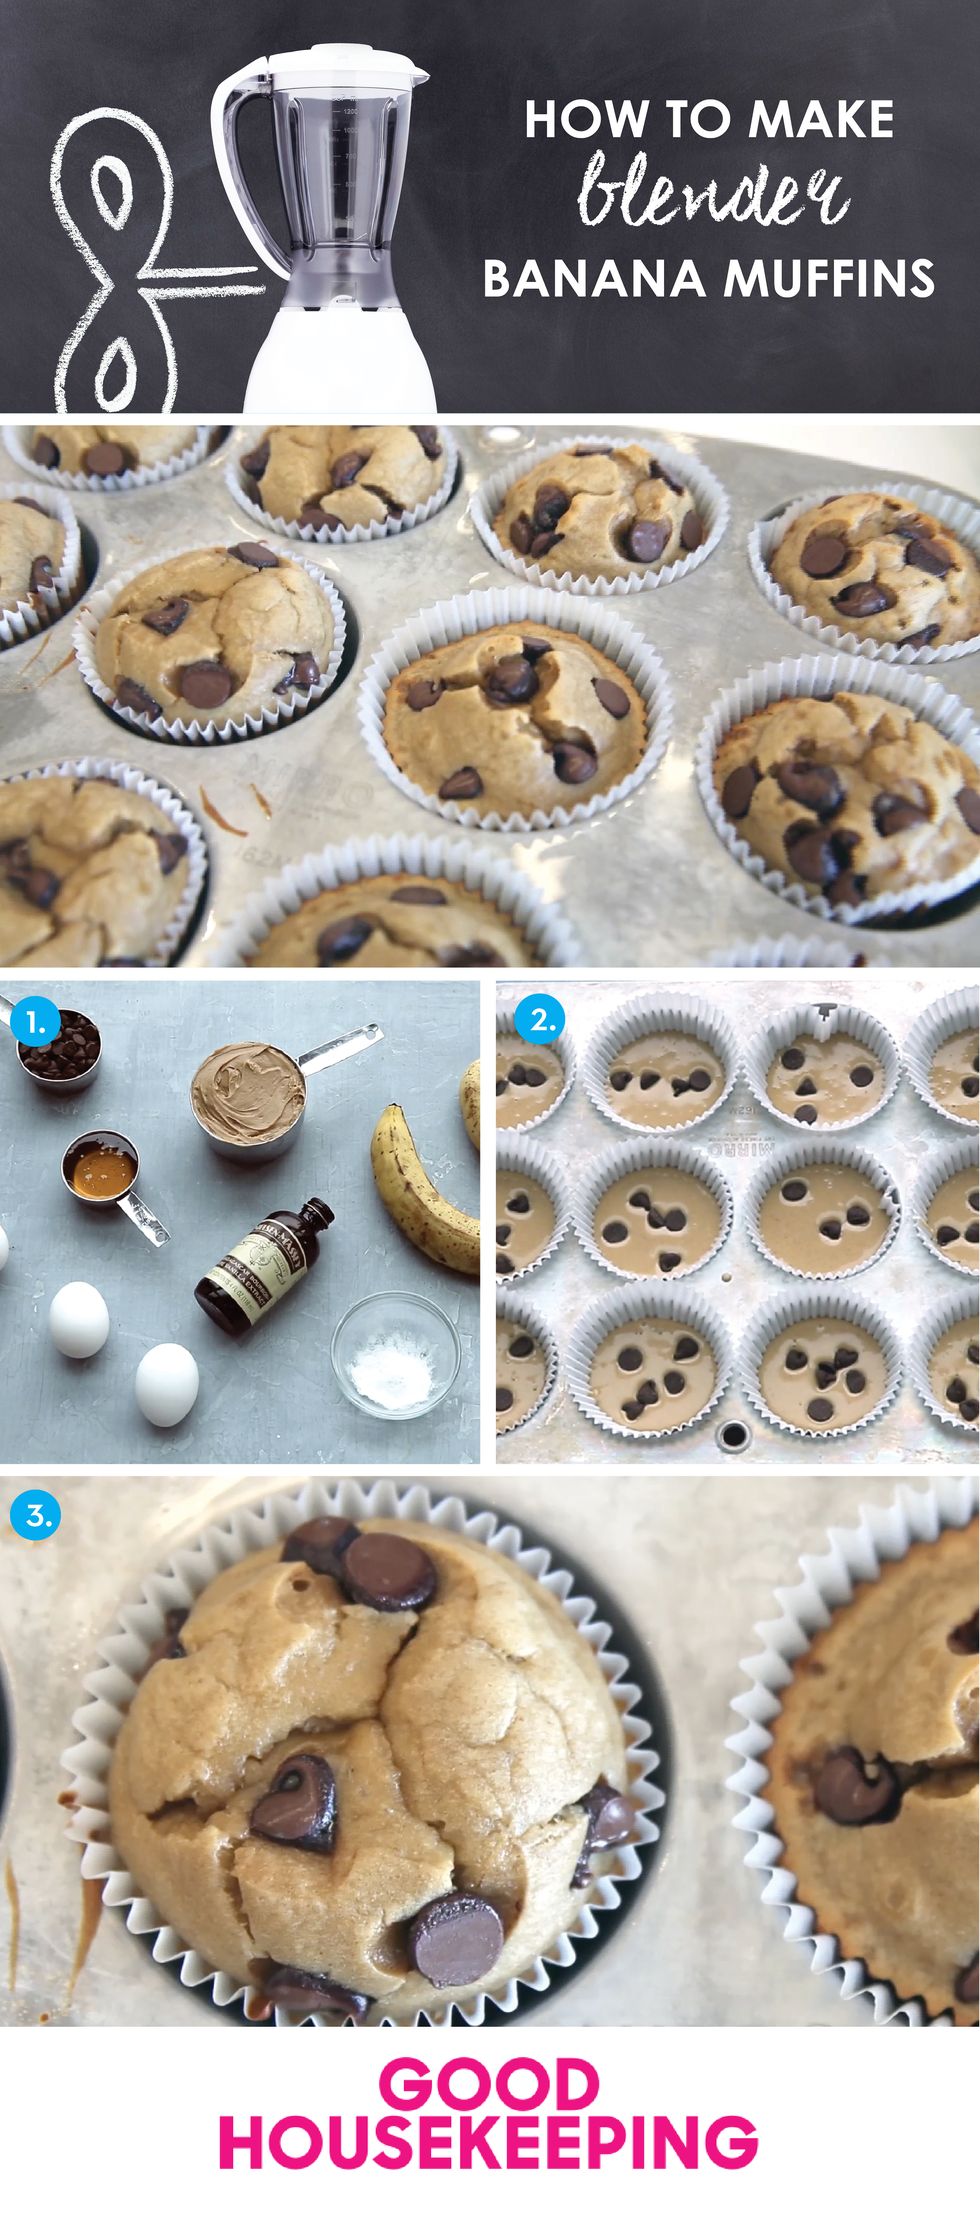 Learn how to make banana muffins in the blender